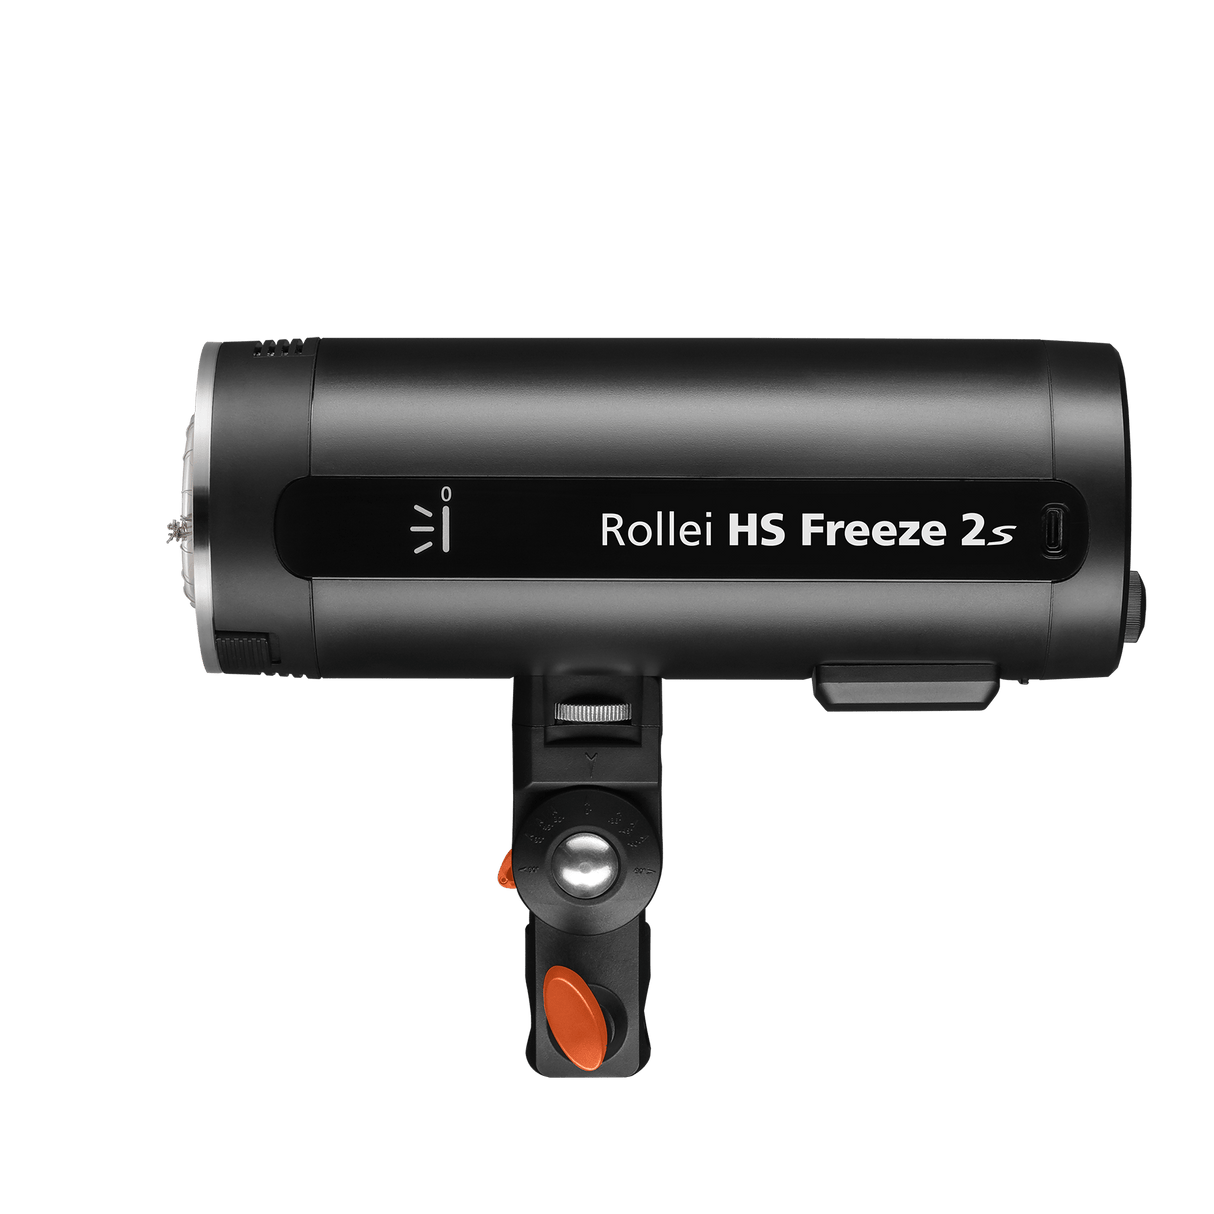 HS Freeze 2s battery studio Rollei – flash with 